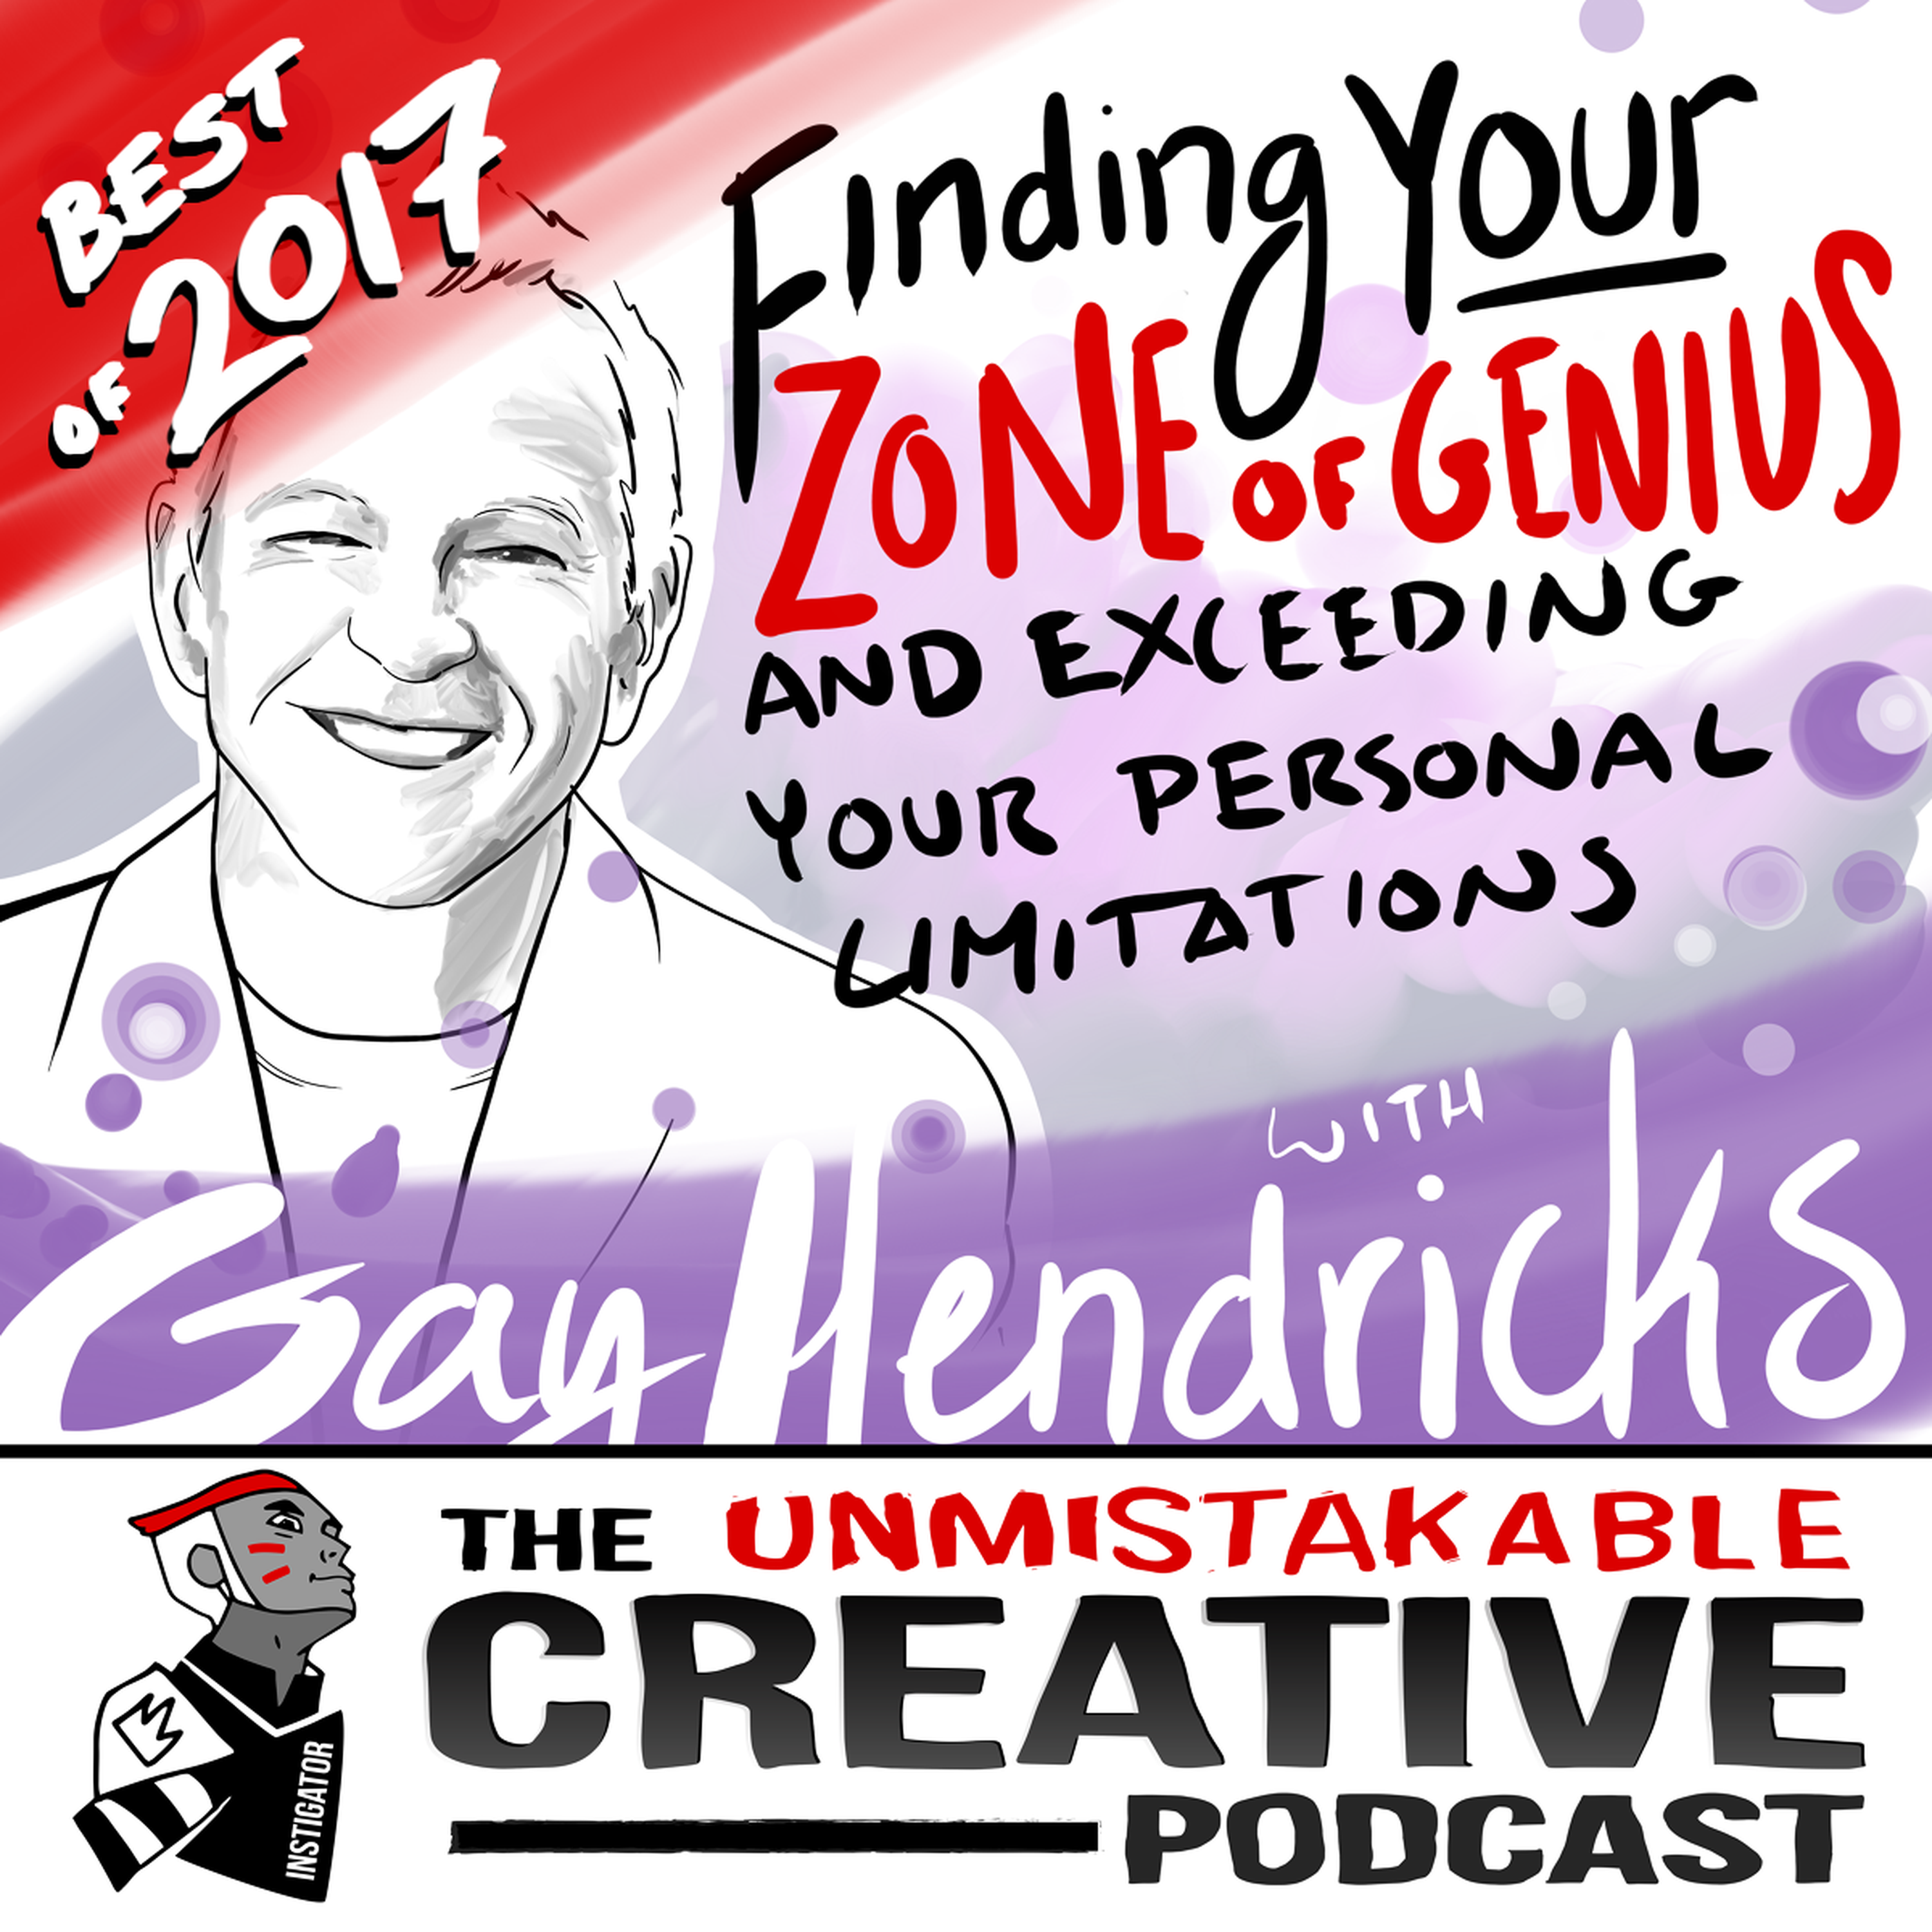 Best of 2017: Finding Your Zone of Genius and Exceeding Your Personal Limitations with Gay Hendricks